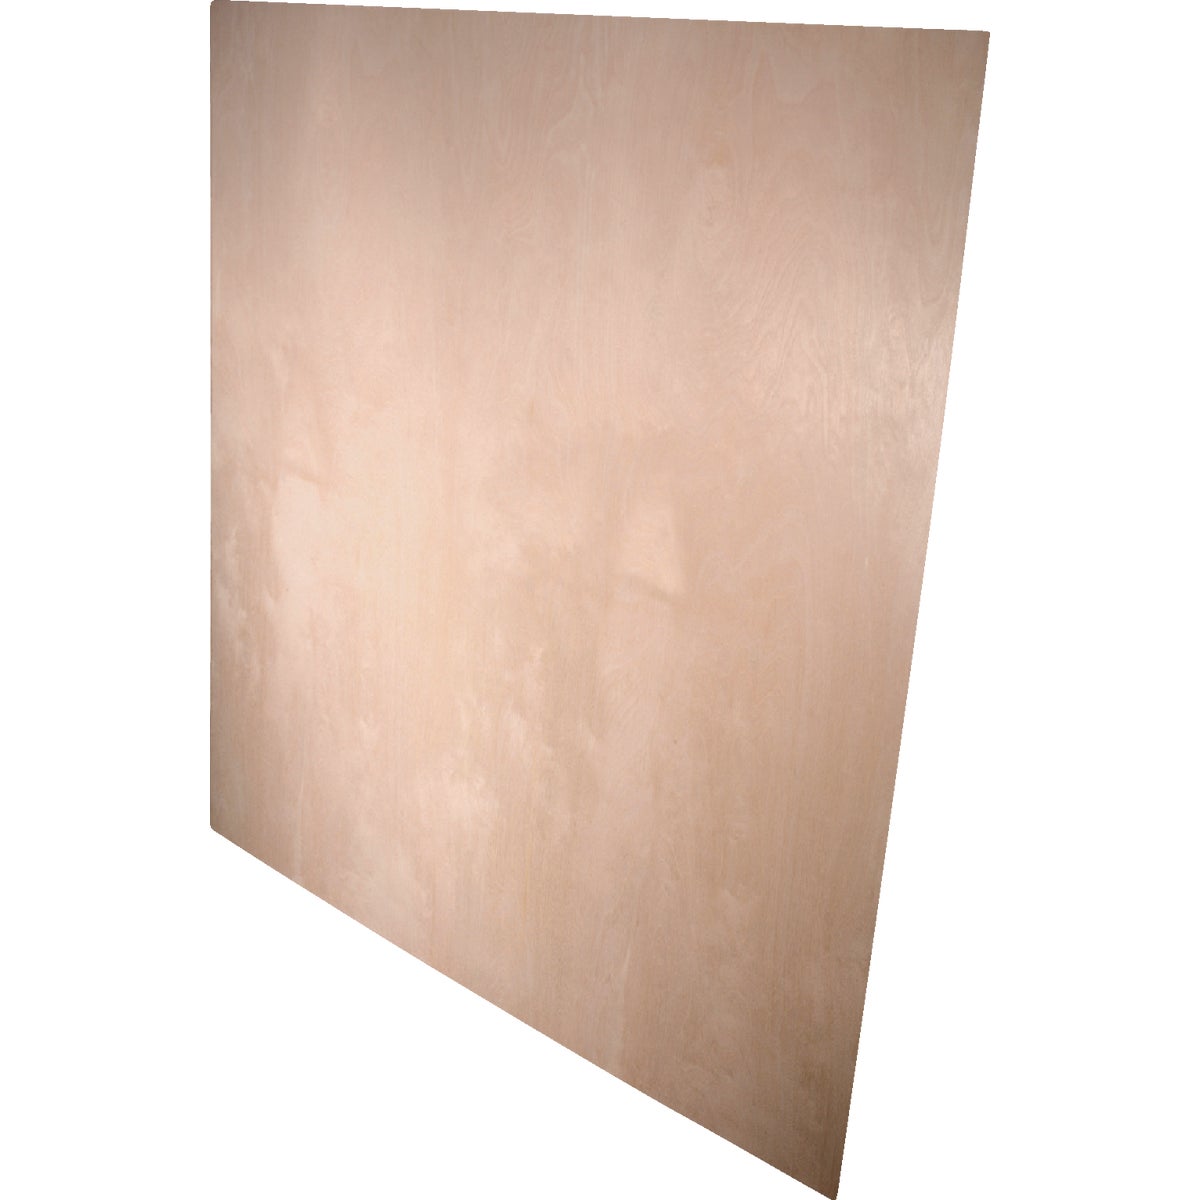 Alexandria Moulding 3/4 In. x 48 In. x 48 In. Pine Plywood